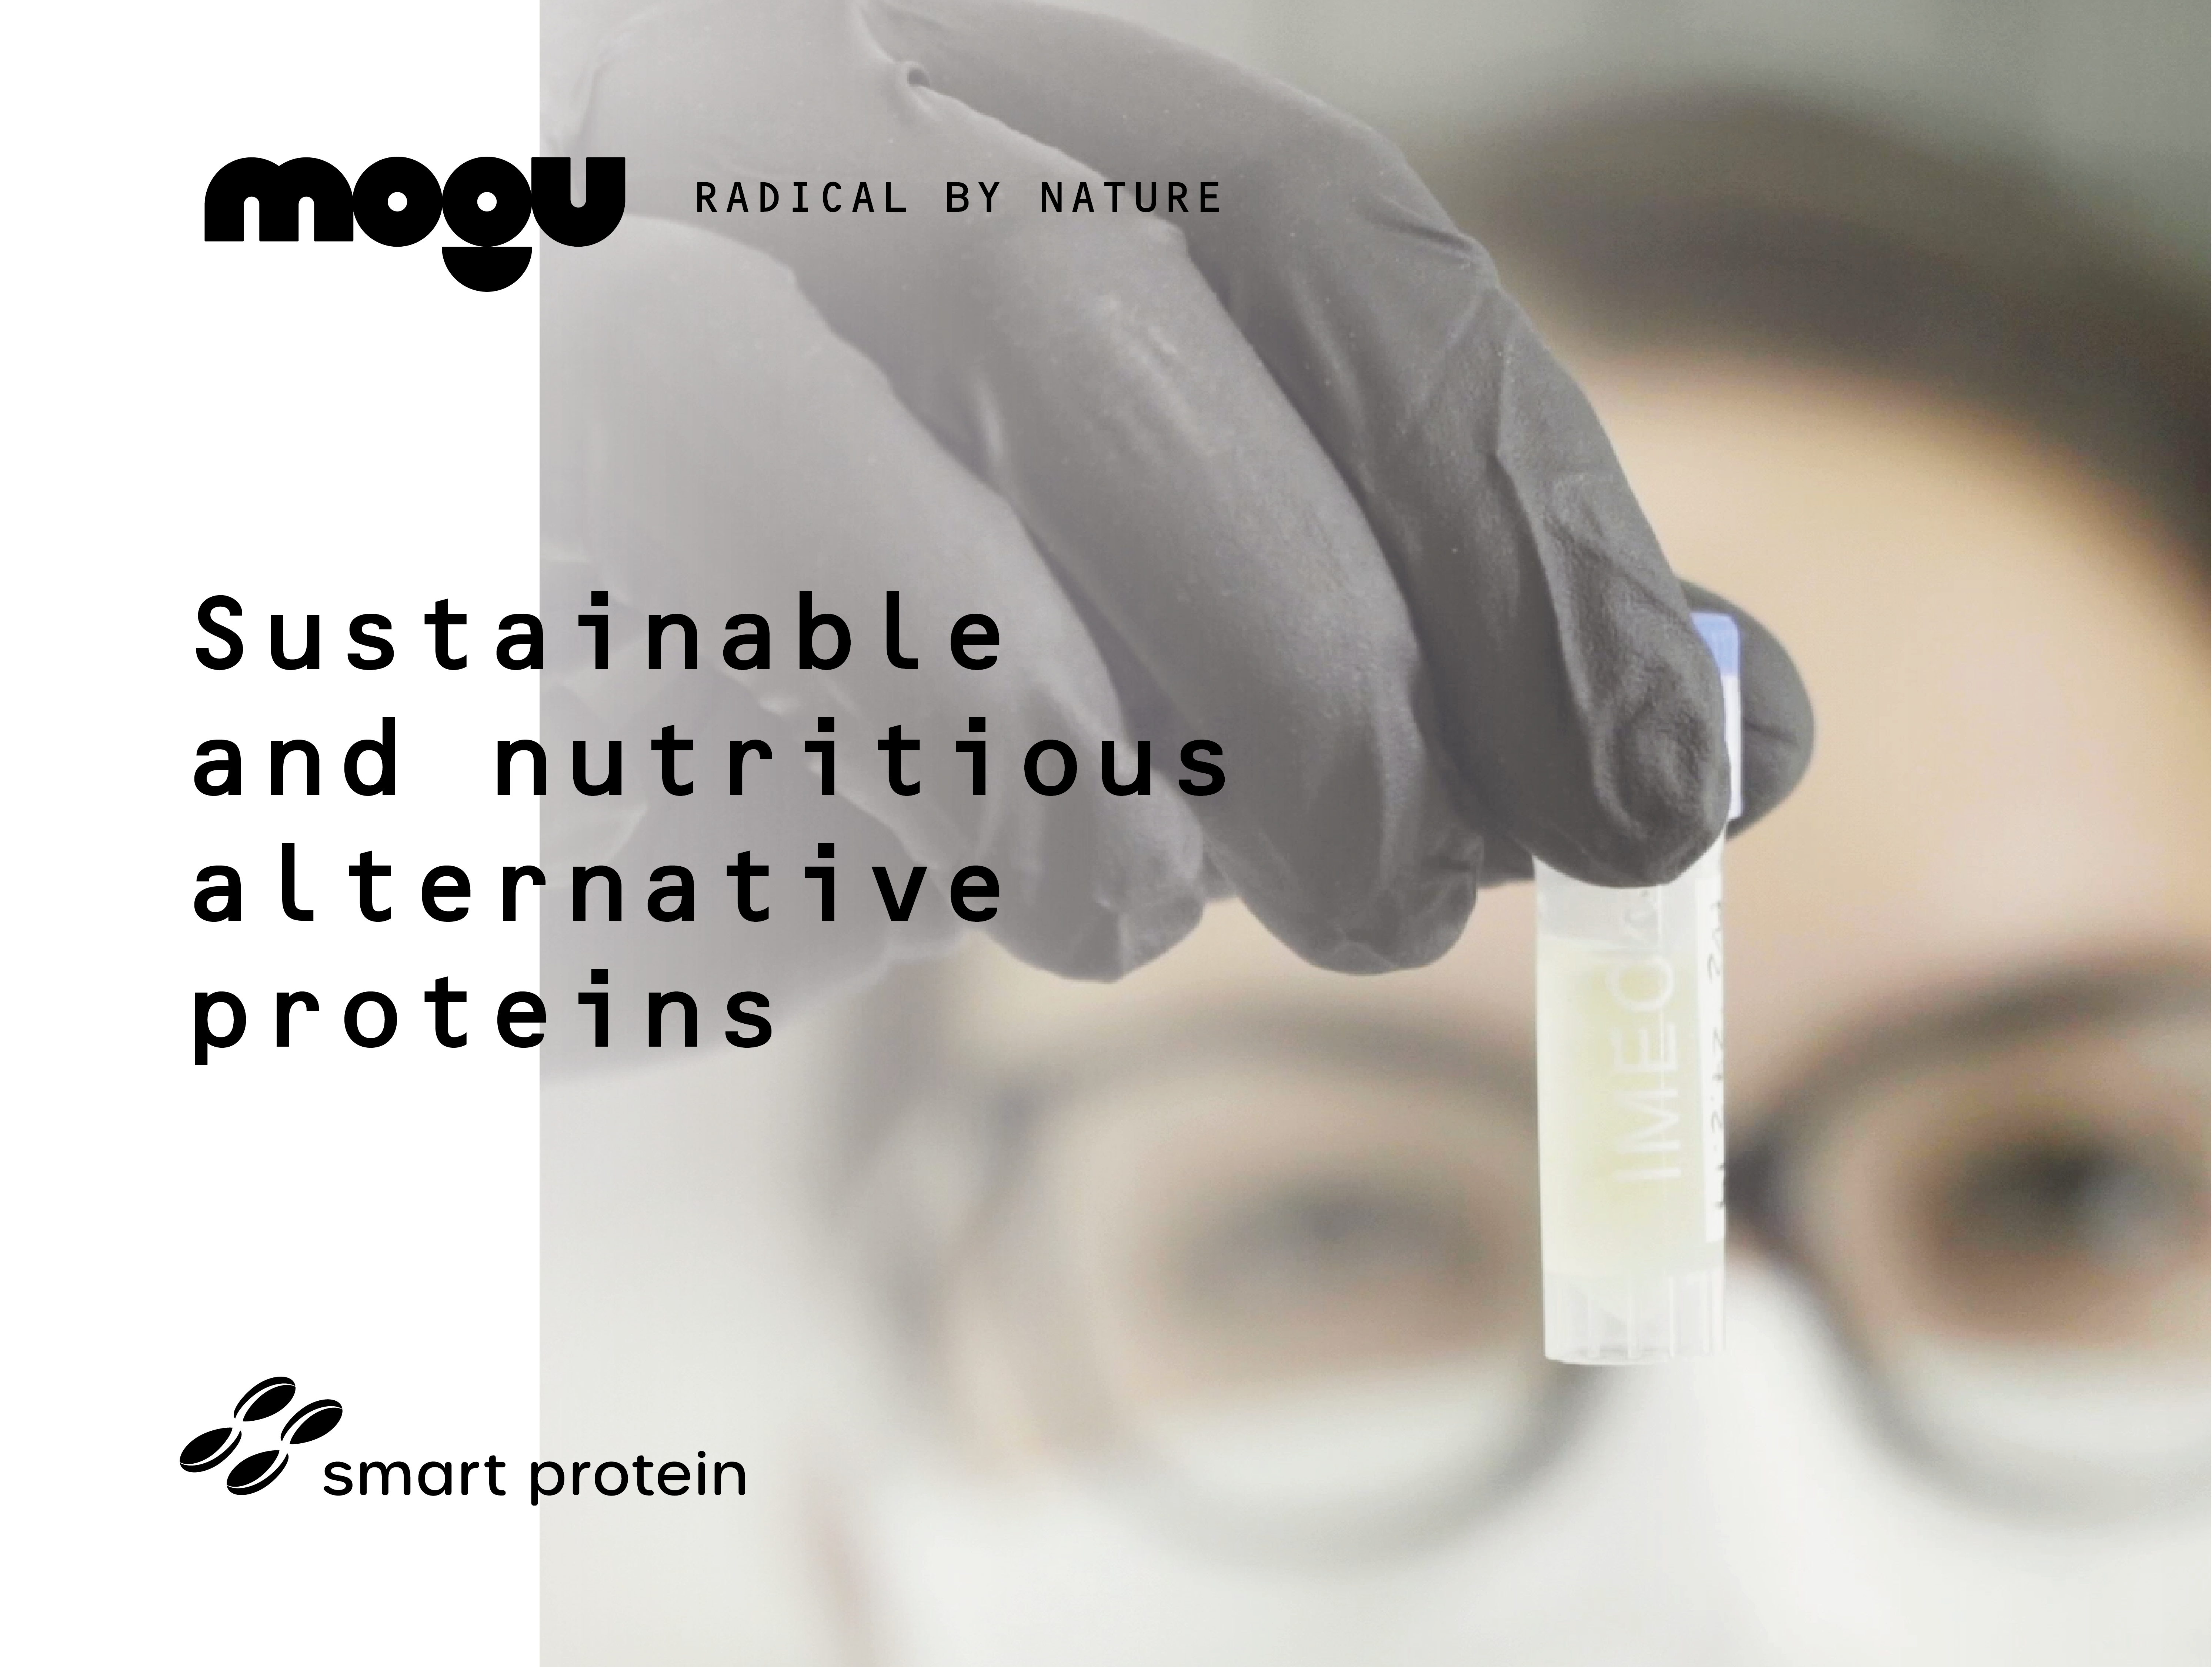 SMART PROTEIN PROJECT // Next Generation of Smart Protein Foods // Horizon 2020 – European Commission